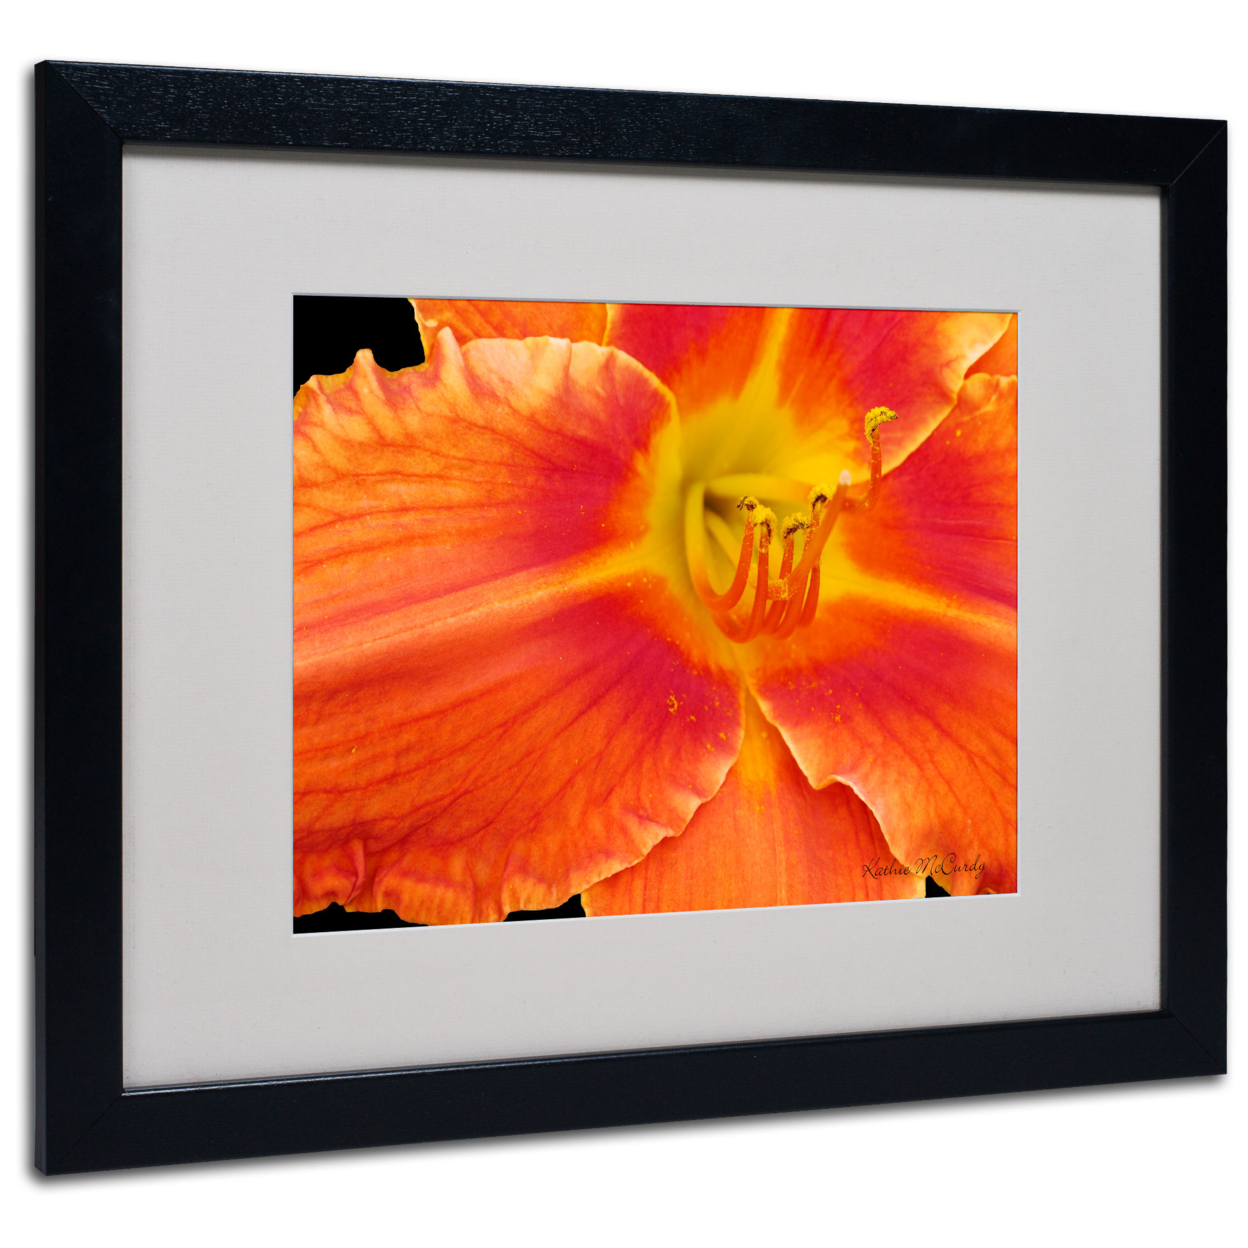 Kathie McCurdy 'Orange Day Lily' Black Wooden Framed Art 18 X 22 Inches